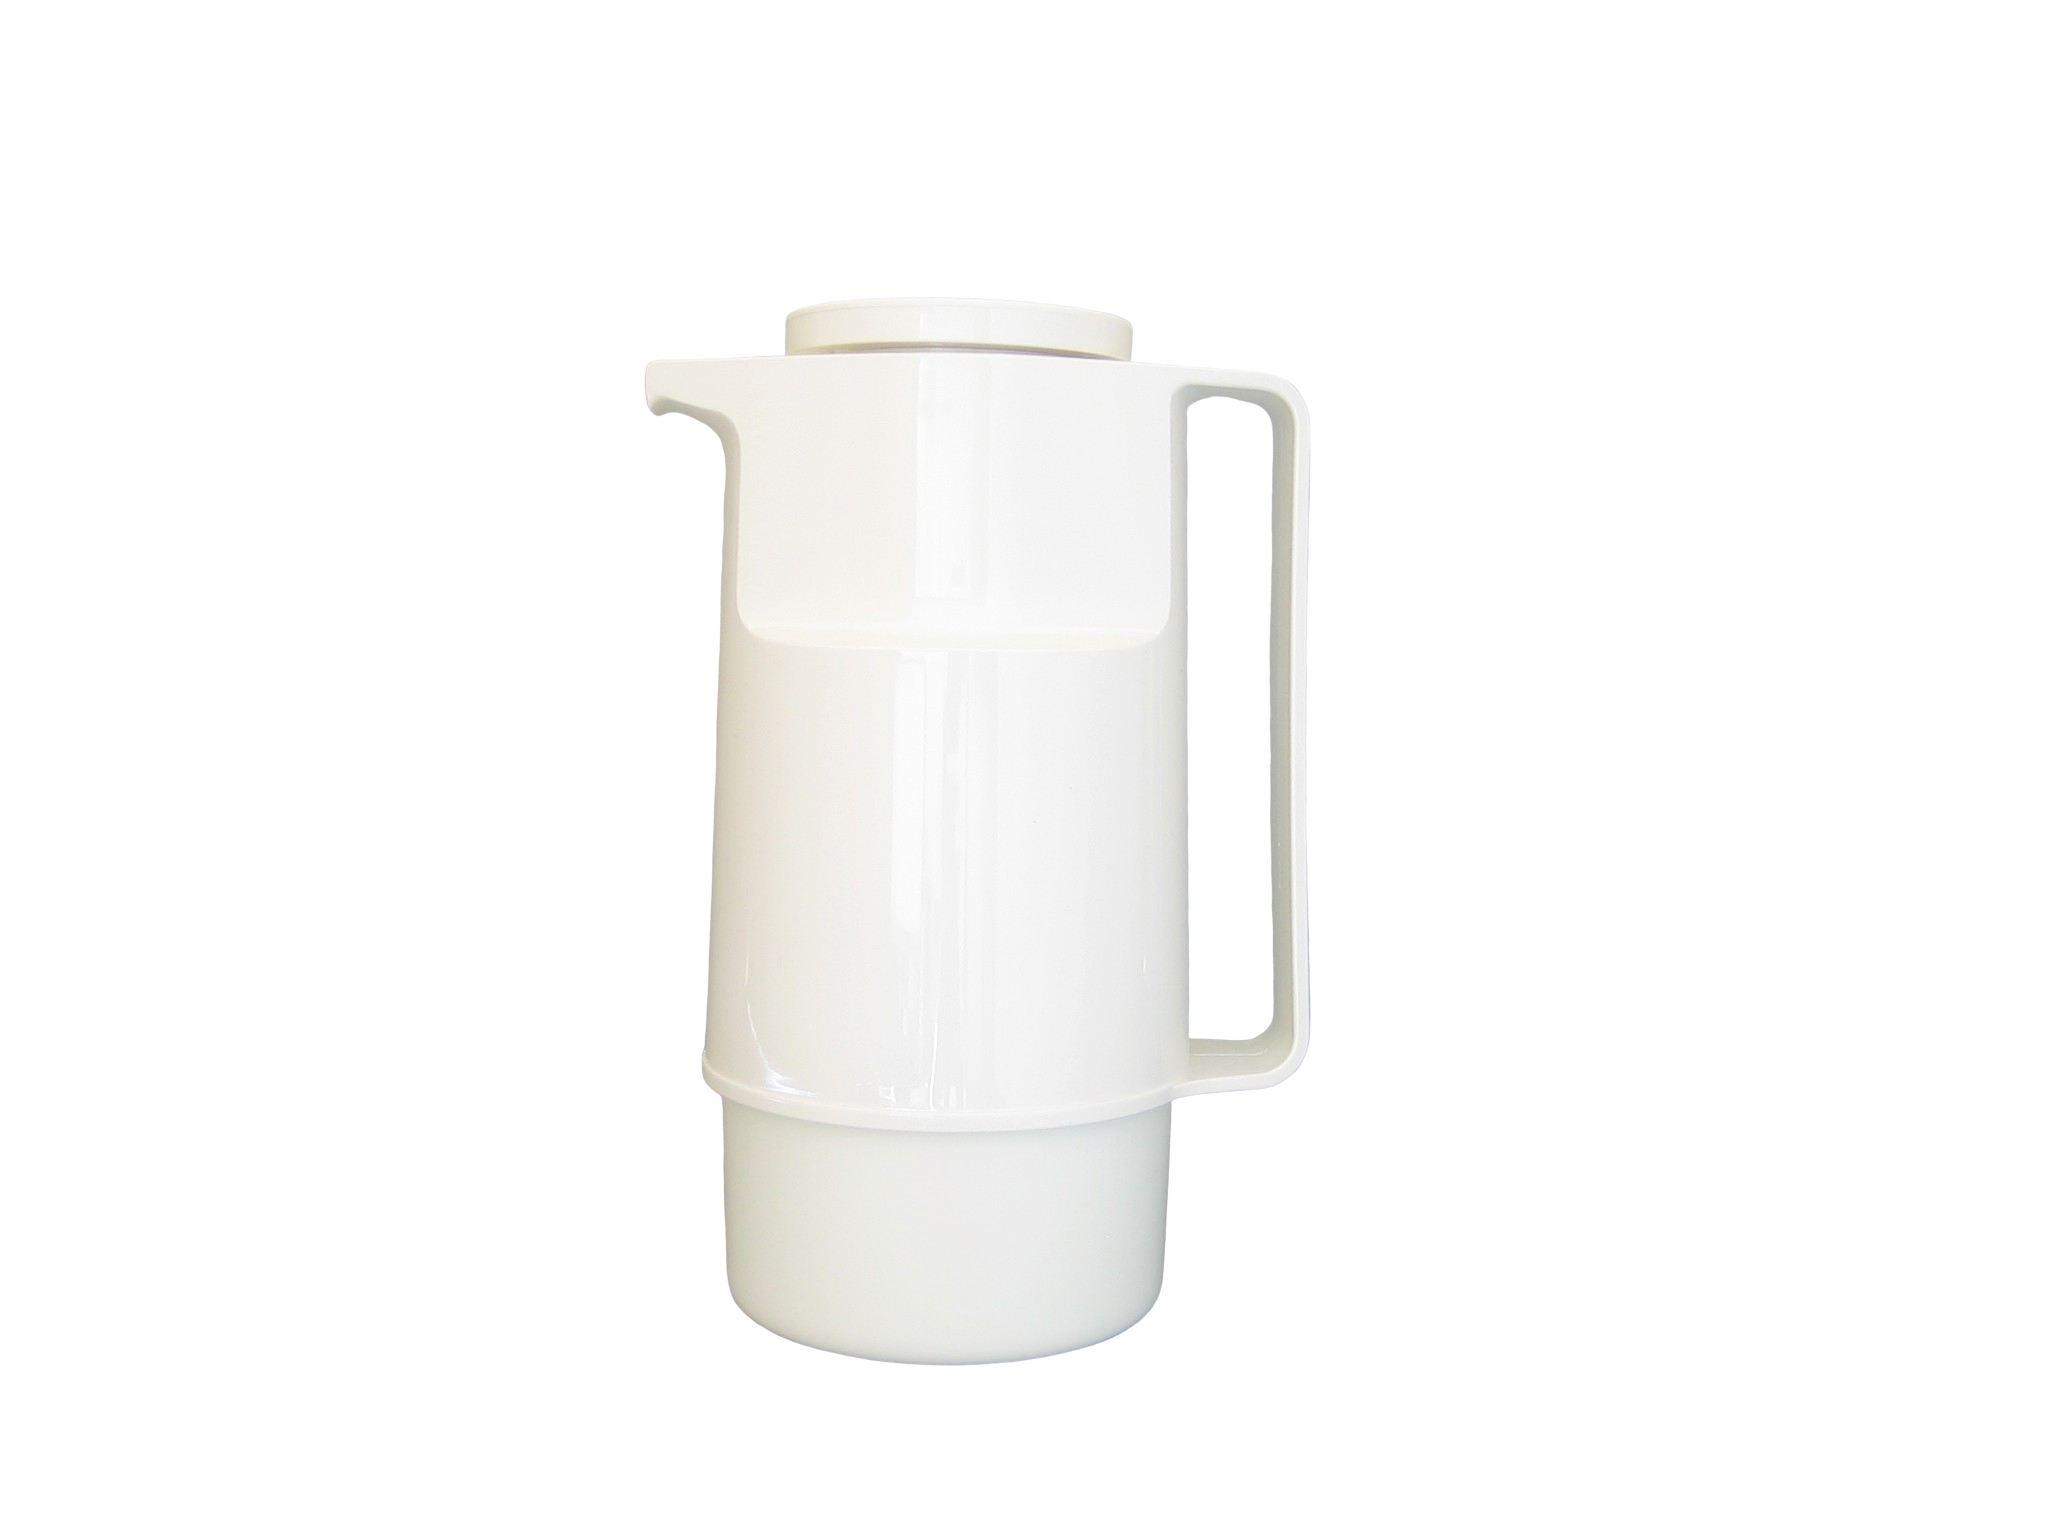 210-001 - Pichet isotherme ABS  blanc 1.0 L - Isobel